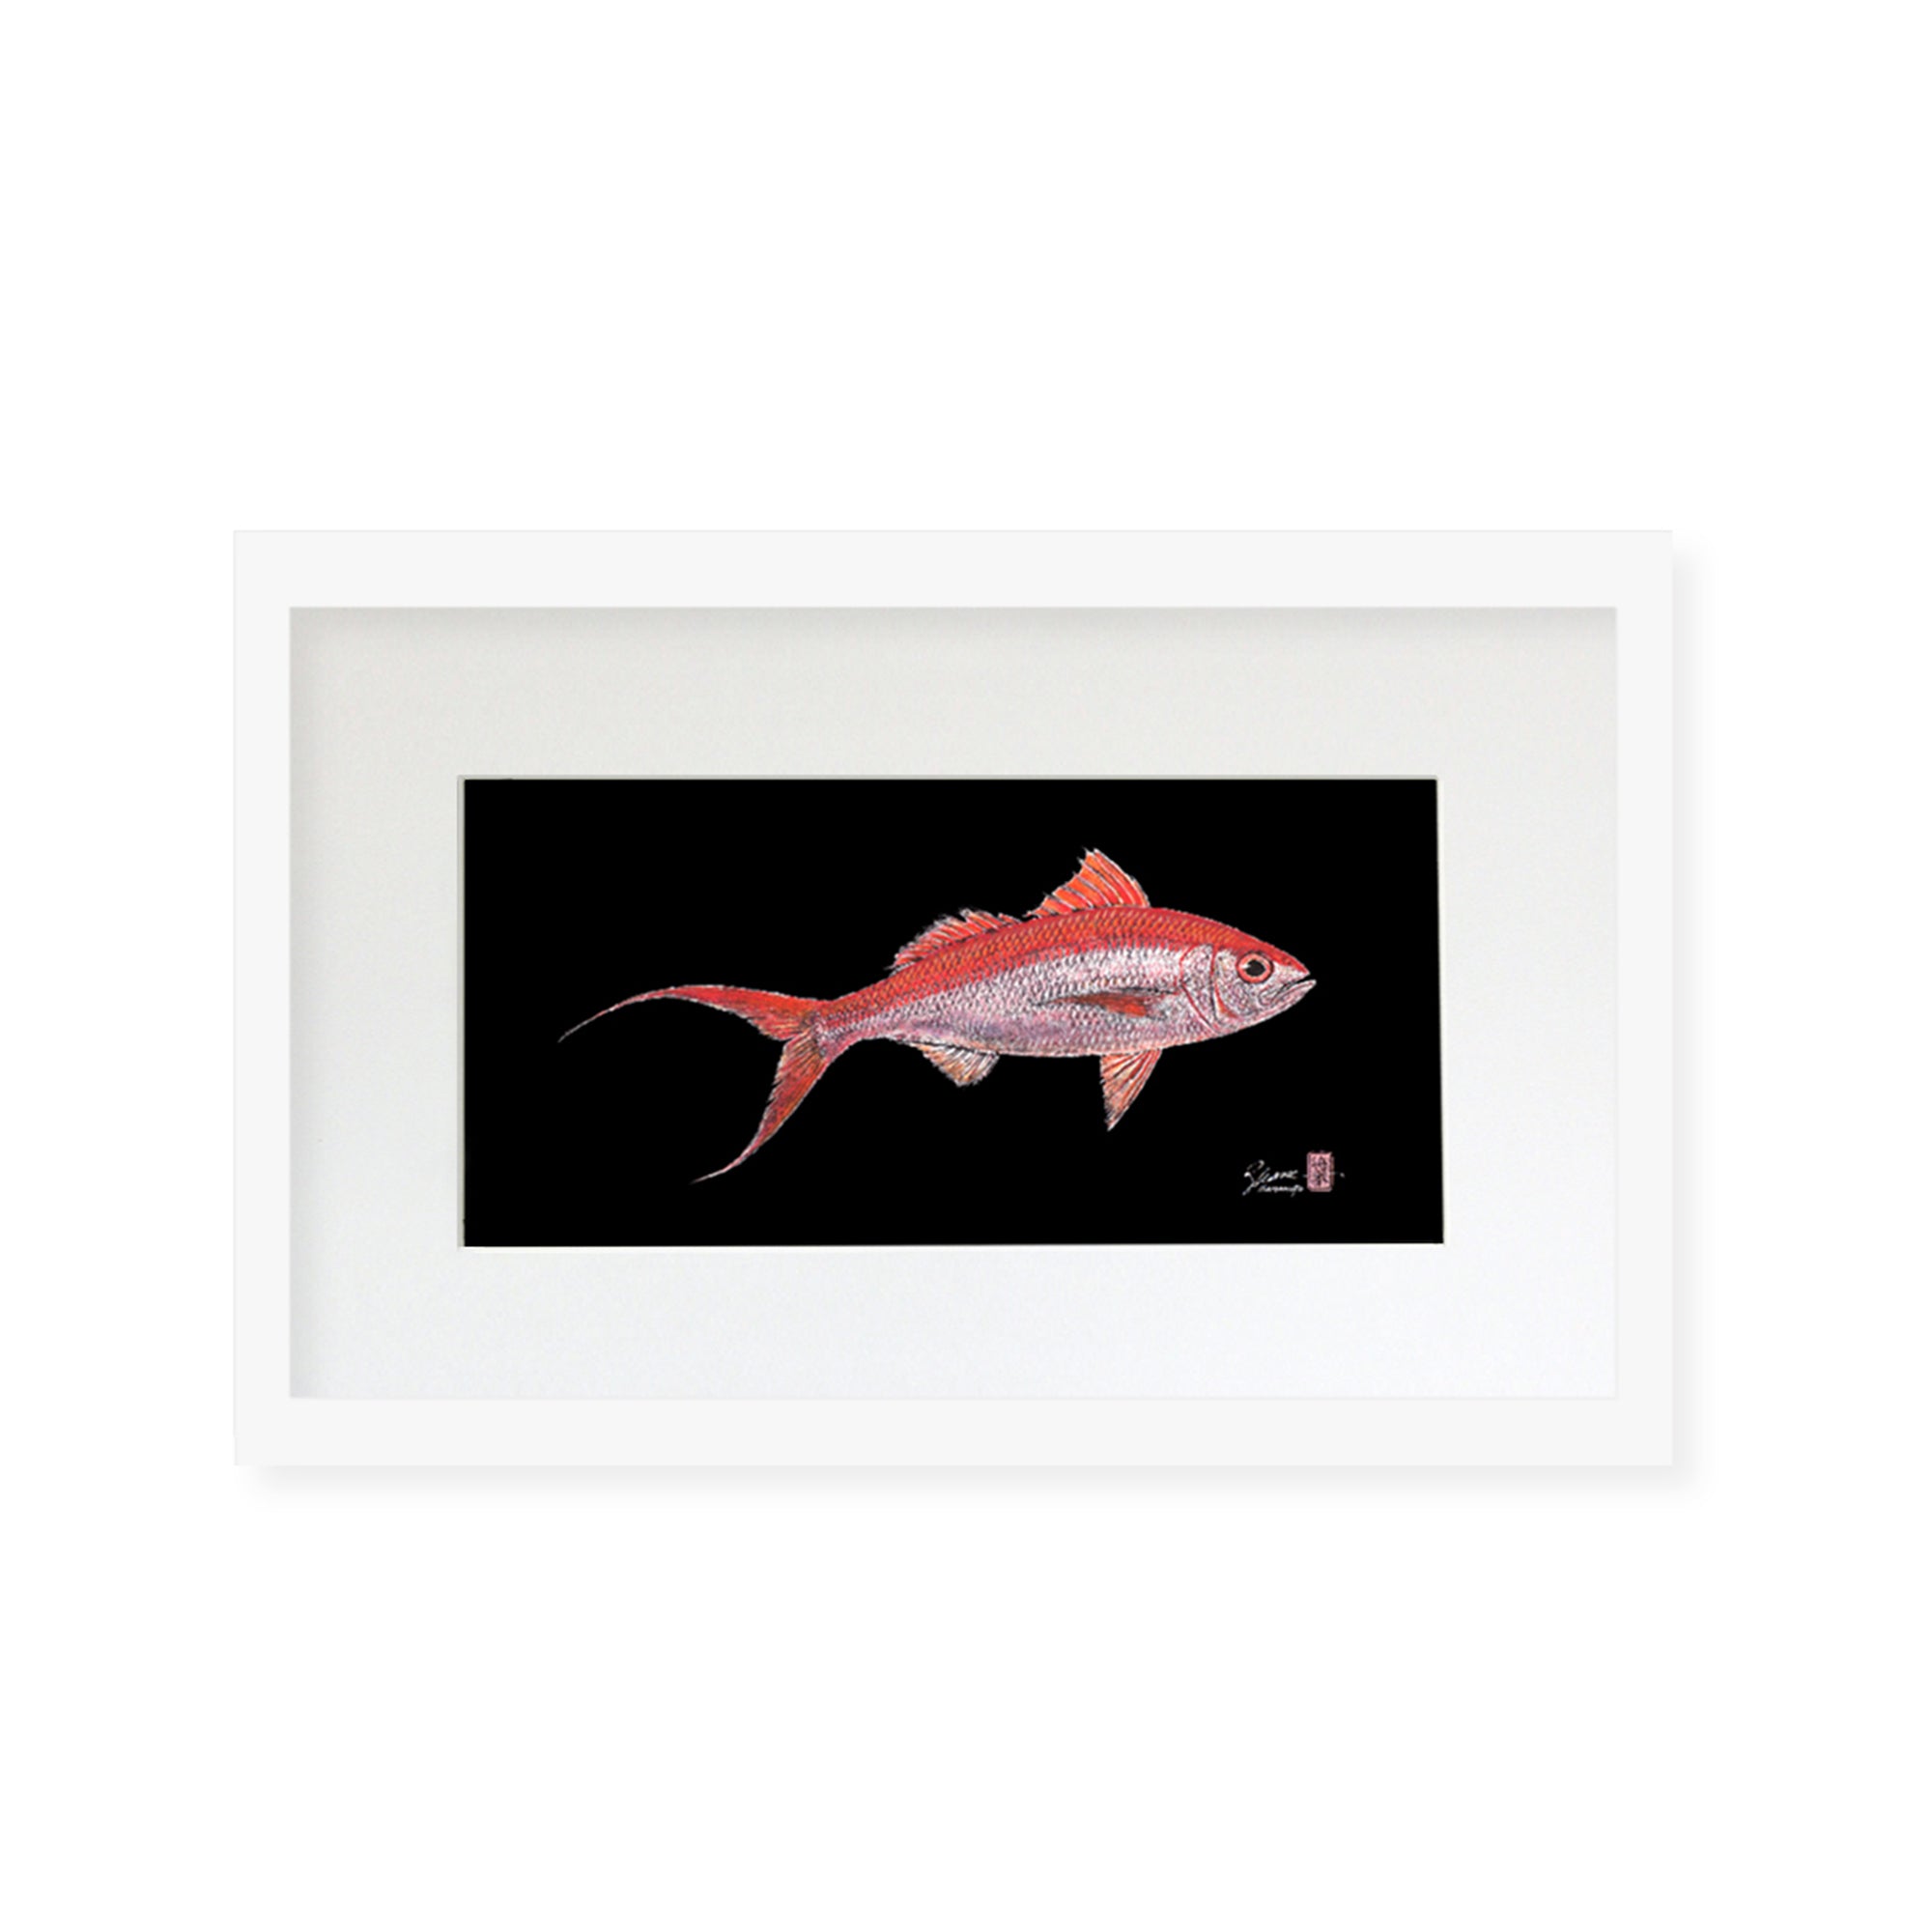 Framed matted print of Onaga (also known as Ruby Snapper or Scarlet Snapper) by Hawaii gyotaku artist Shane Hamamoto